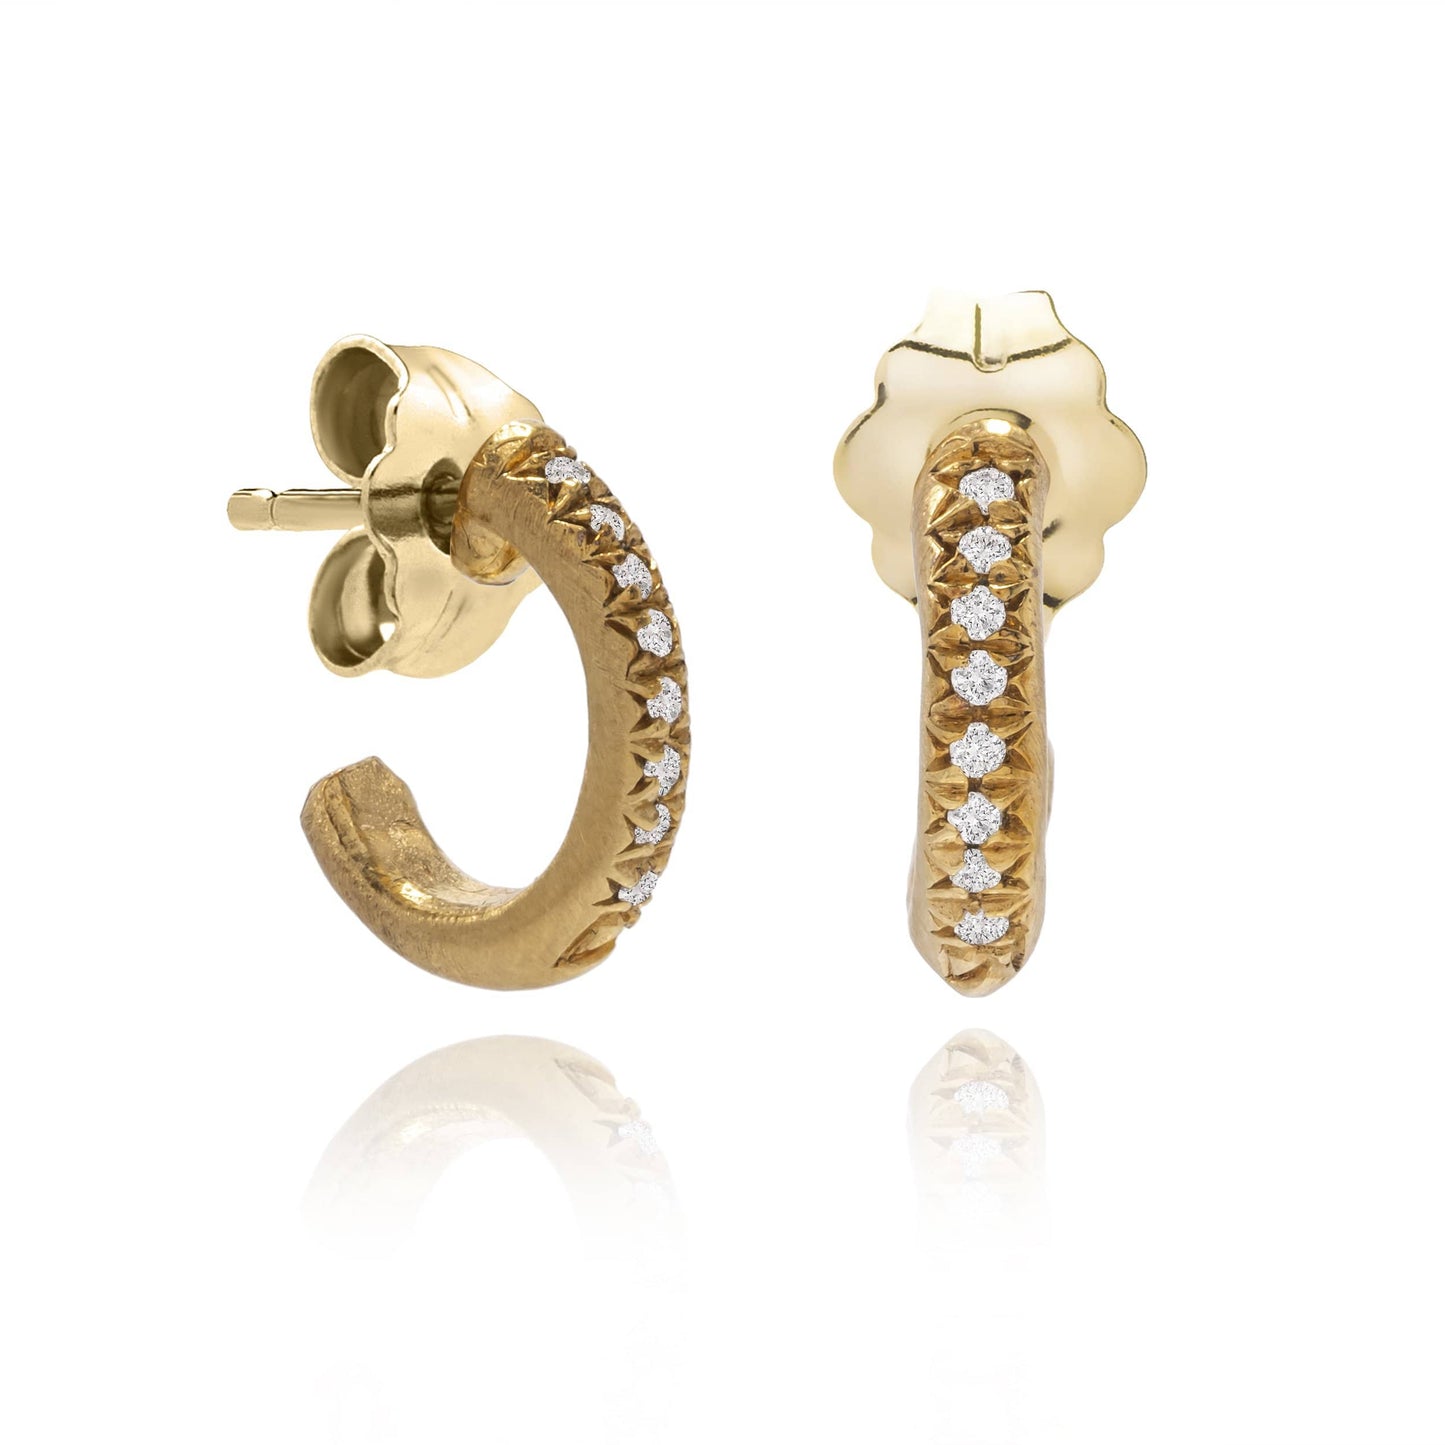 Dalia T Online Earrings Textured Gold Signature Collection 14KT Yellow Gold 10mm Diamond Hoop Earrings